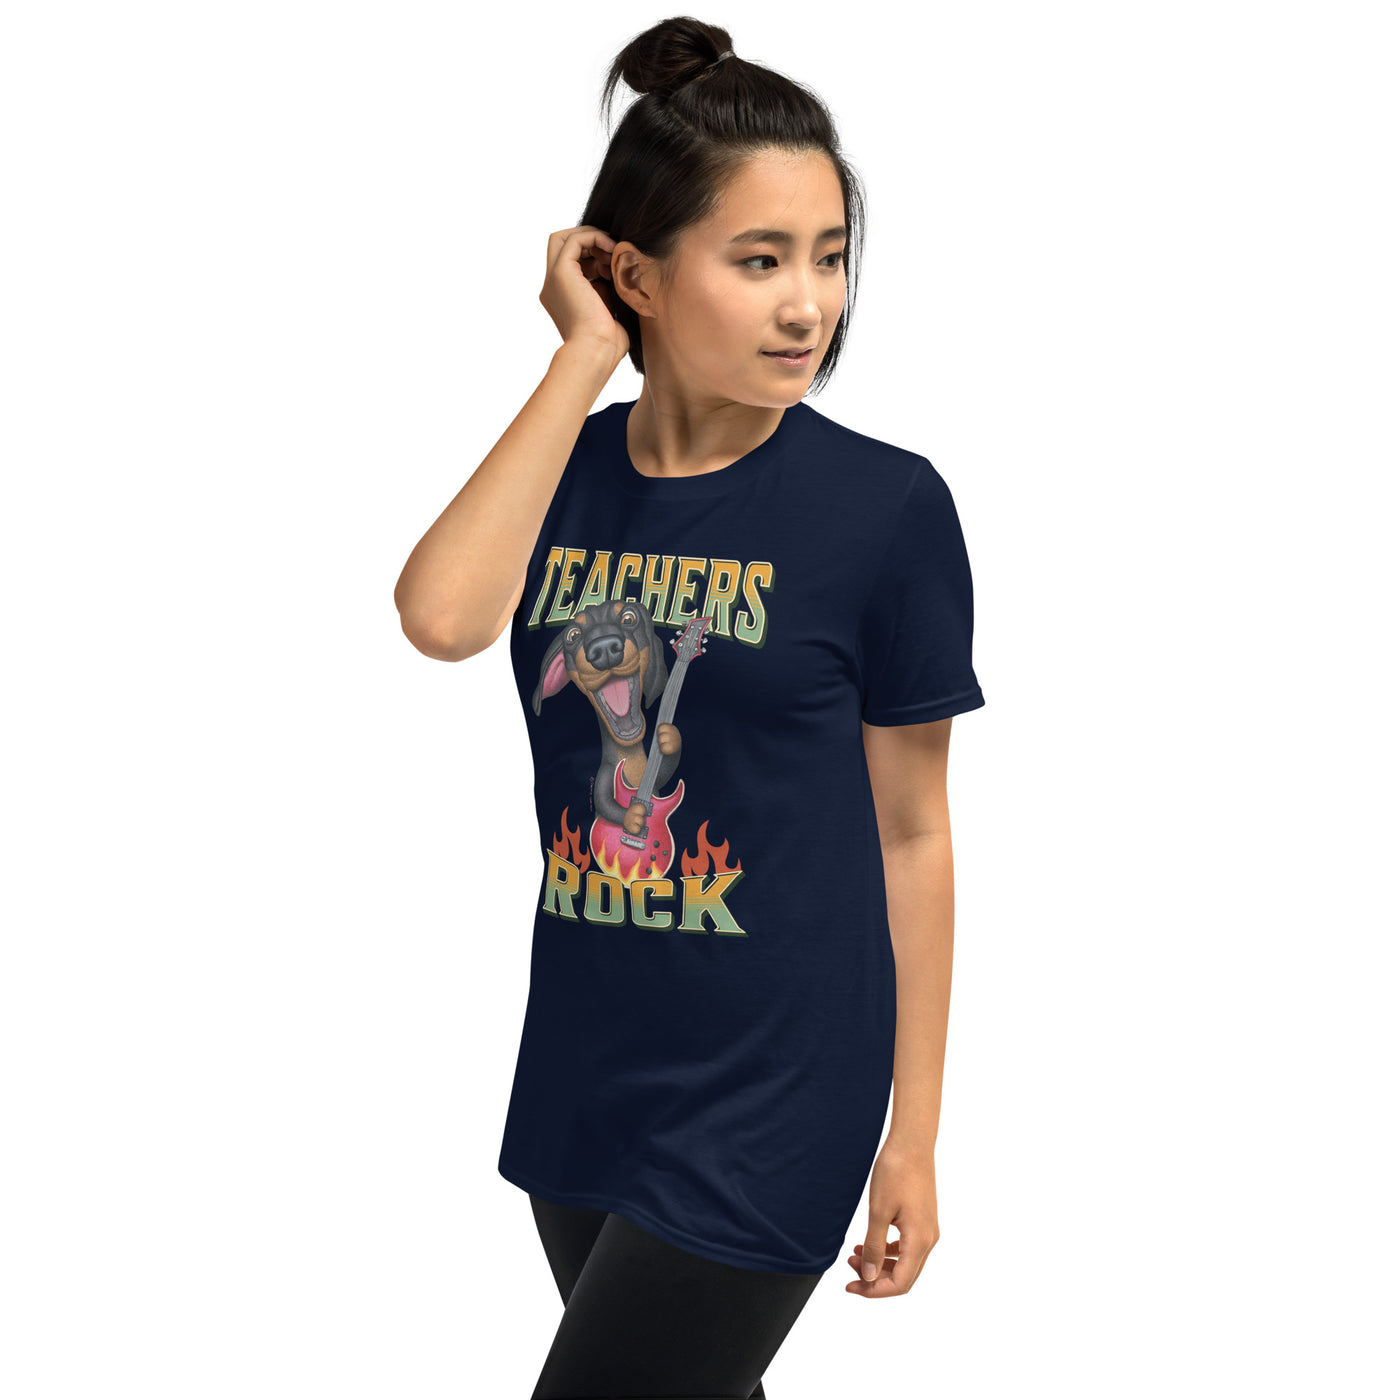 Cute Doxie Dog with guitar on Teachers Rock Unisex T-Shirt